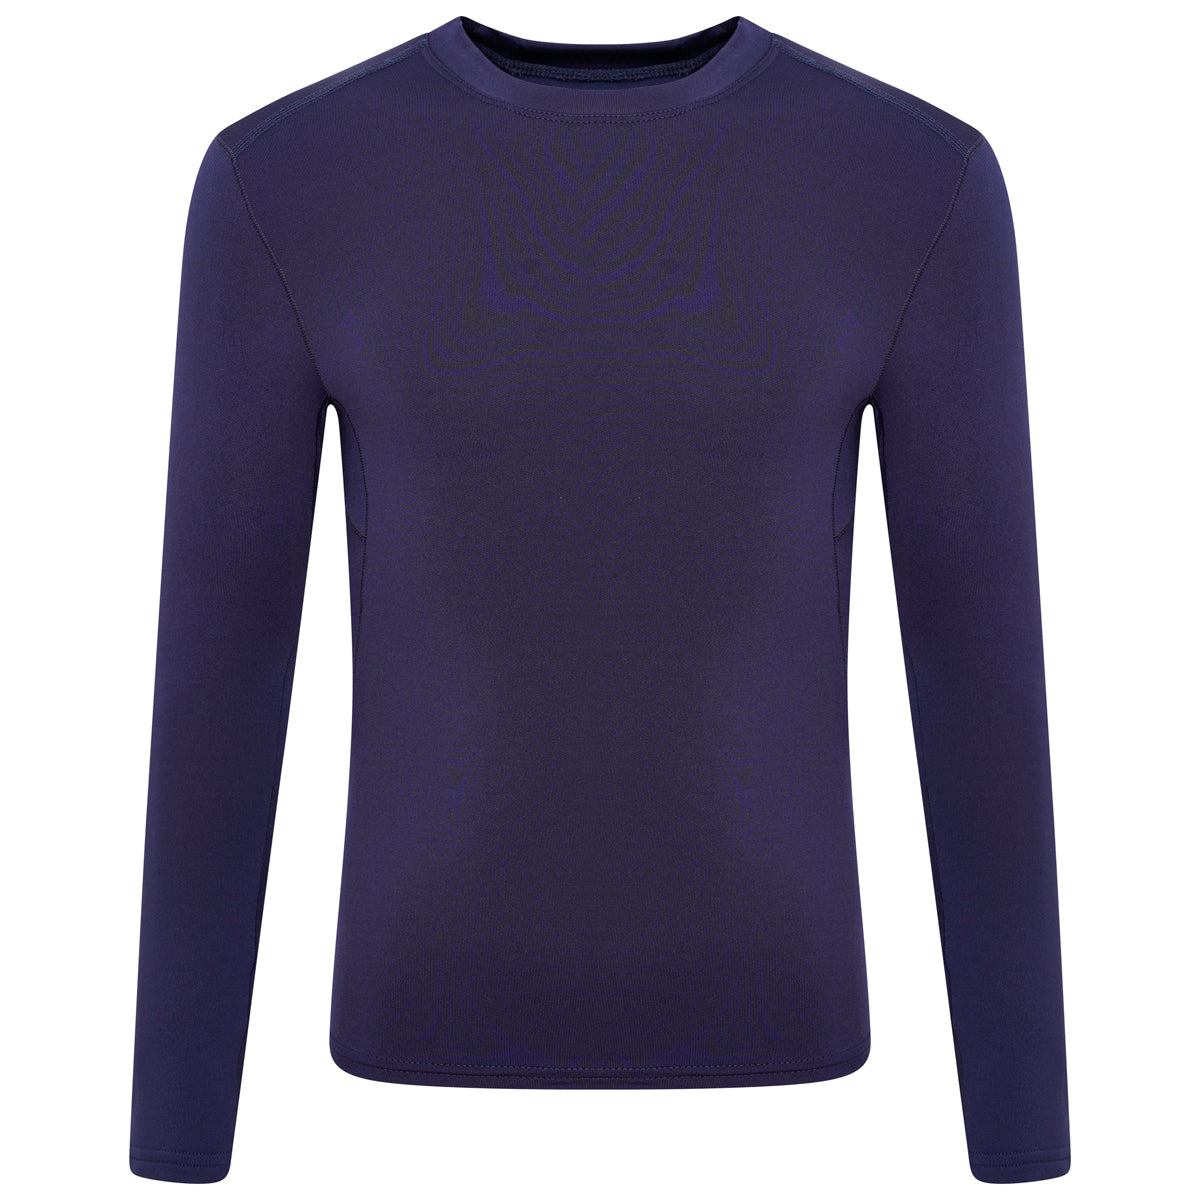 Peover Baselayer Top